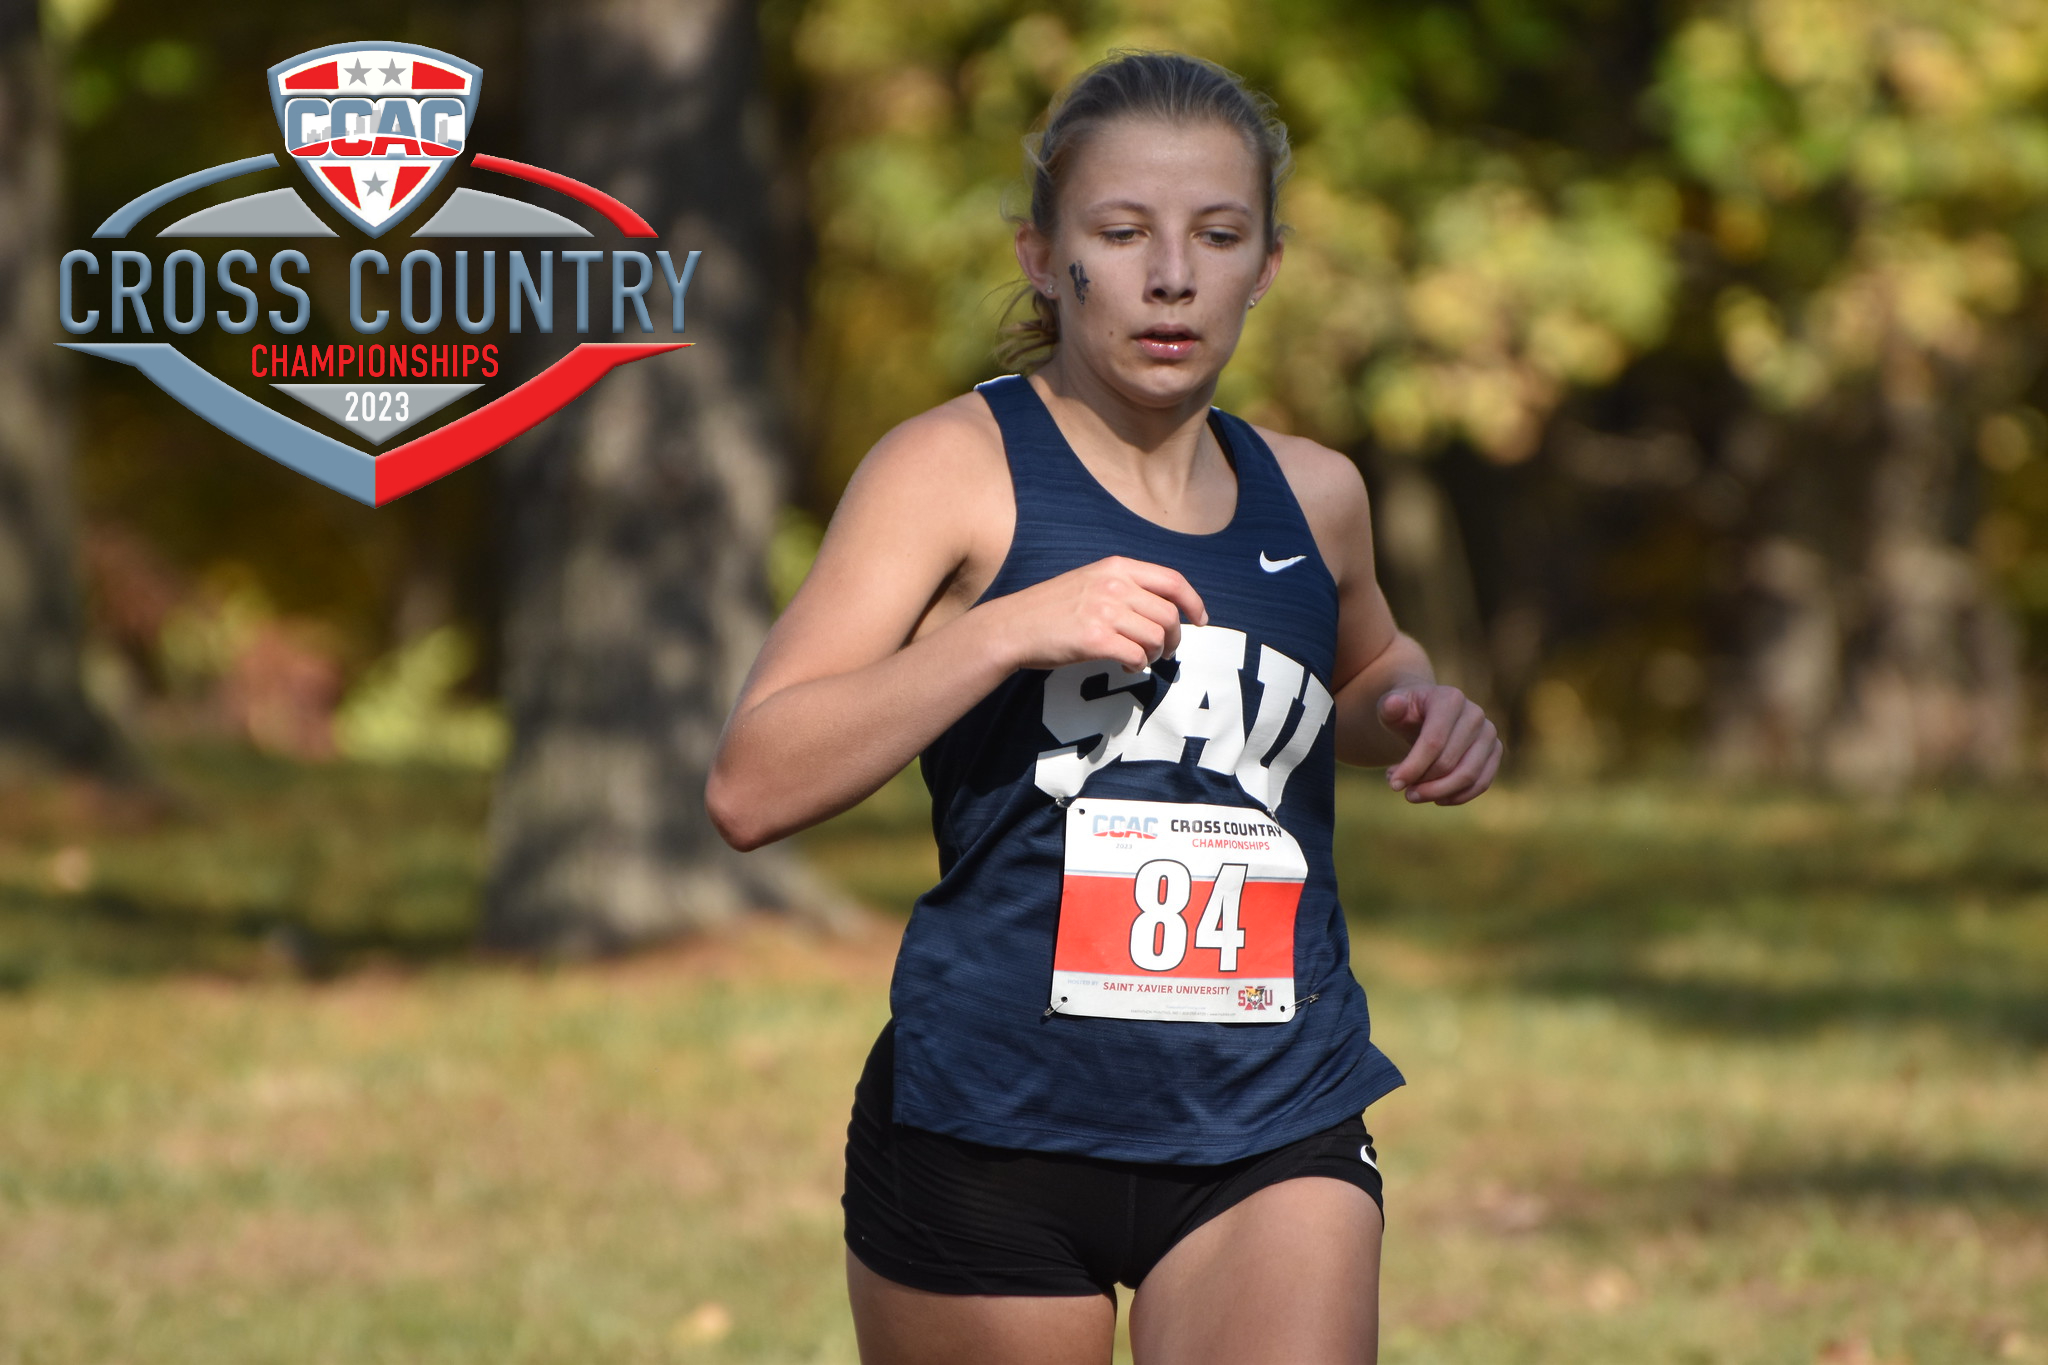 Knoche earns all-conference honors at CCAC Championships